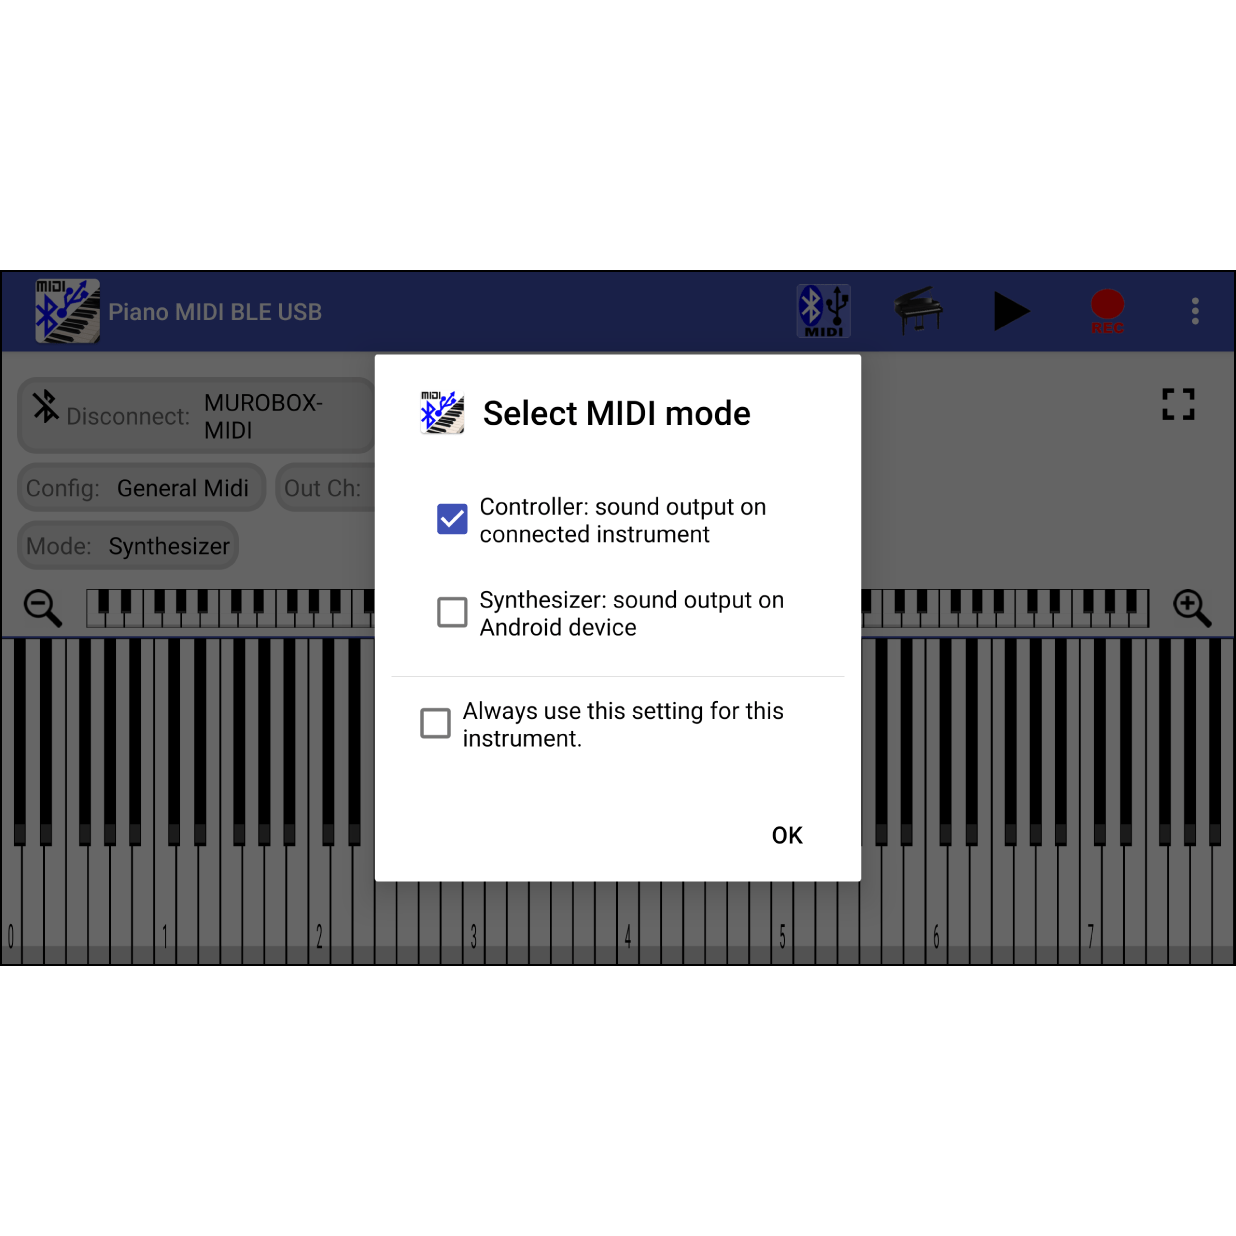 4. Select the MIDI ModeIf the bluetooth search result is correct, you will find the option”MUROBOX-MIDI”. In the menu of “Select MIDI mode”, select “Controller”, and hit “OK”.